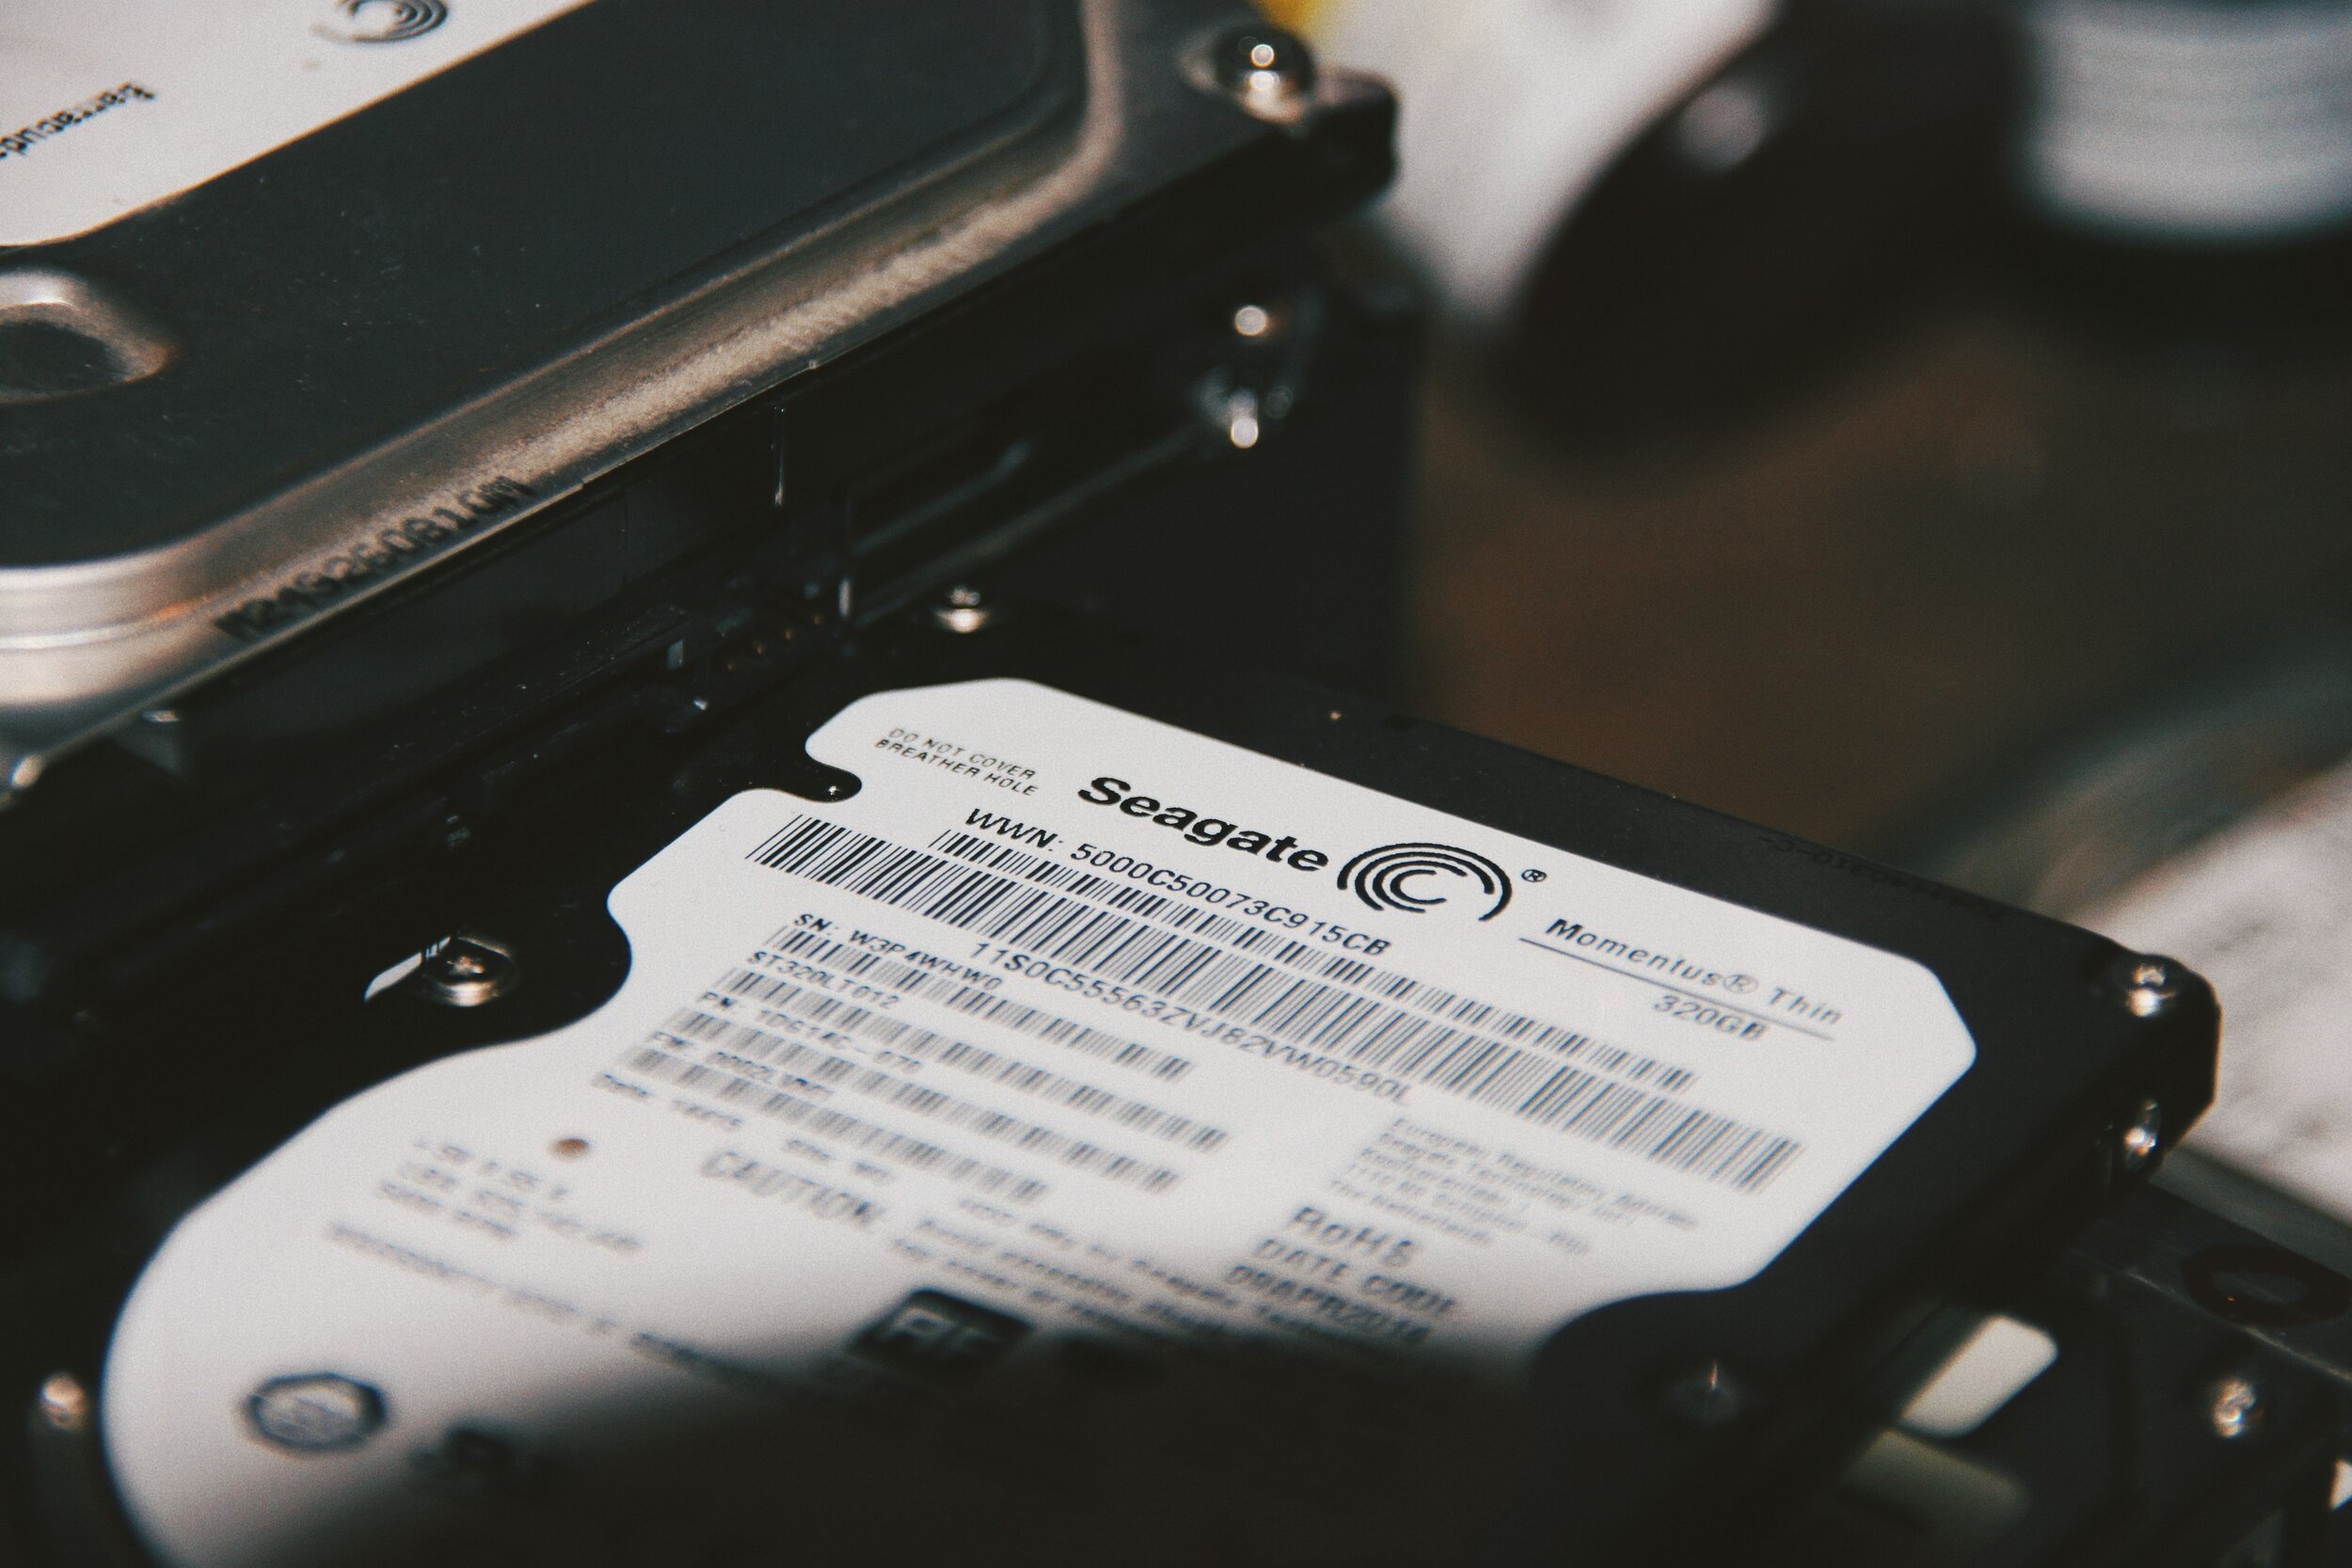 SSDs And Storage Drives For Your Studio | Production Expert